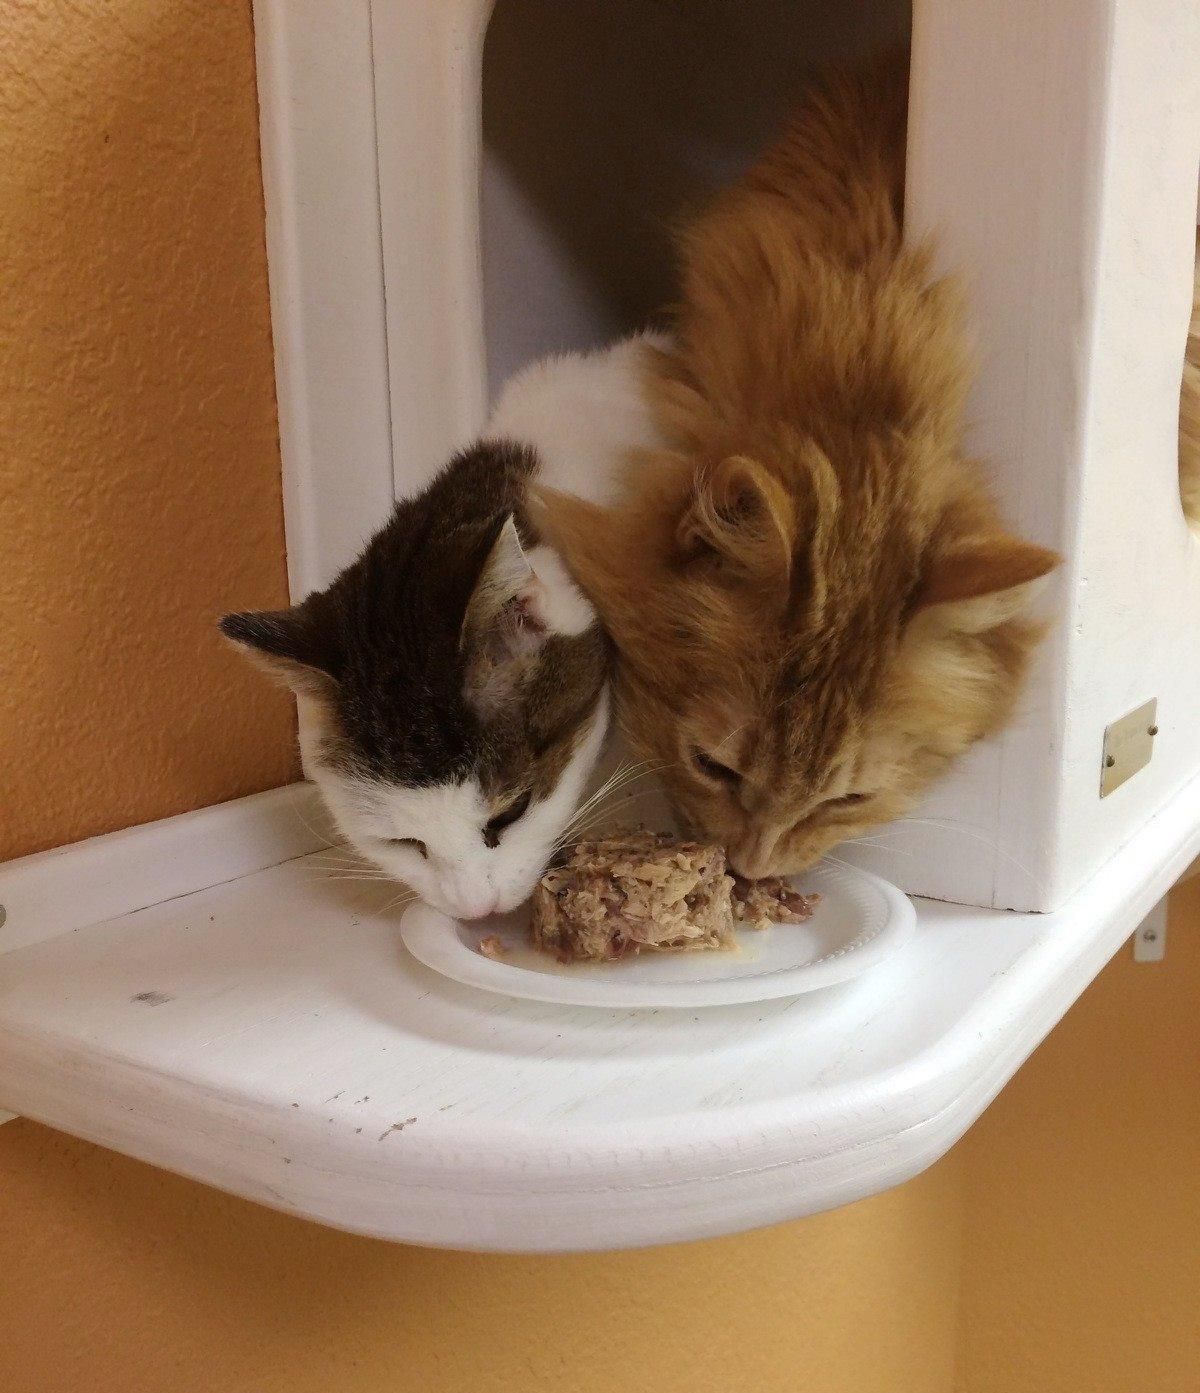 Two Cats Who Lived Rough Lives Find Each Other At Shelter Something Beautiful Happens Love Meow